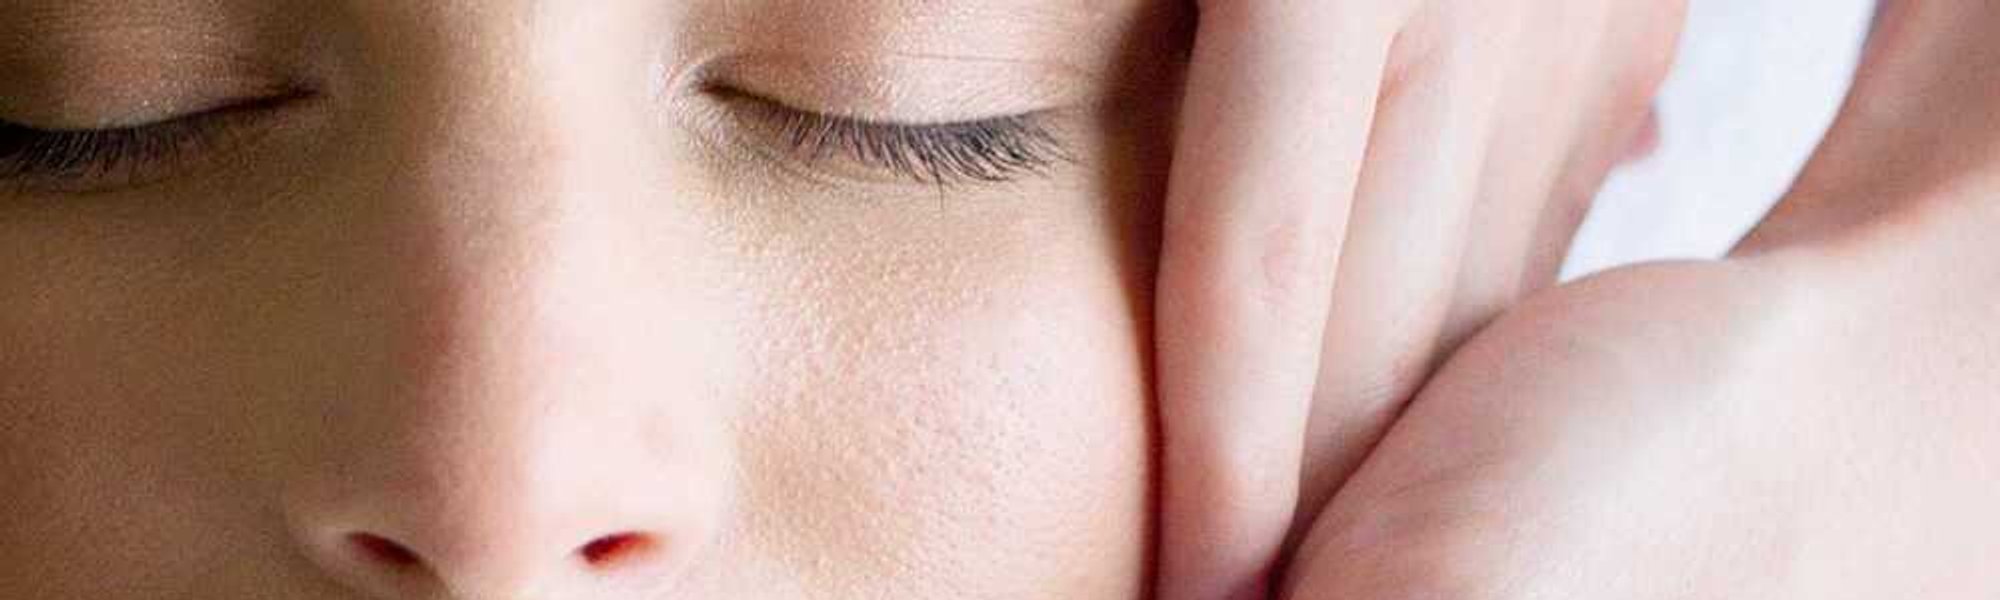 5 Home Remedies For Blackheads And Clogged Pores